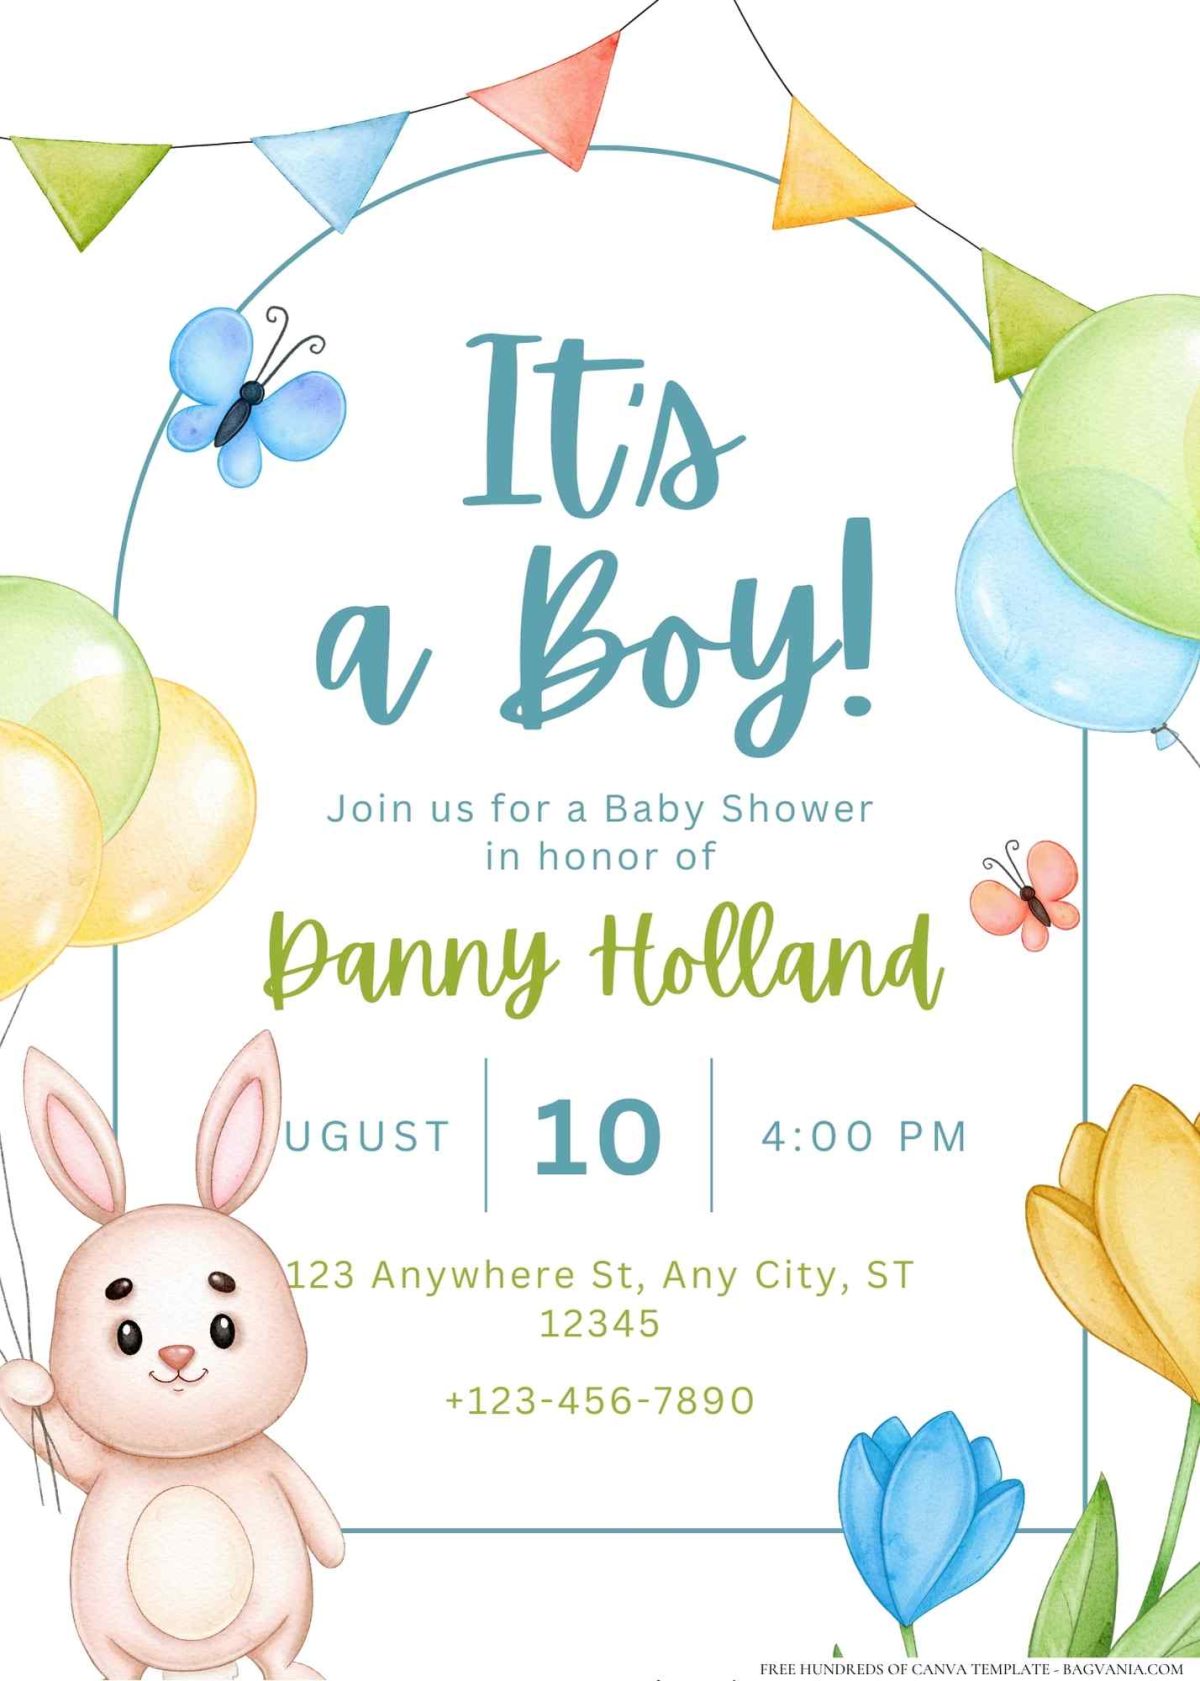 FREE Editable Cute Hare with a carrot Baby Shower Invitation